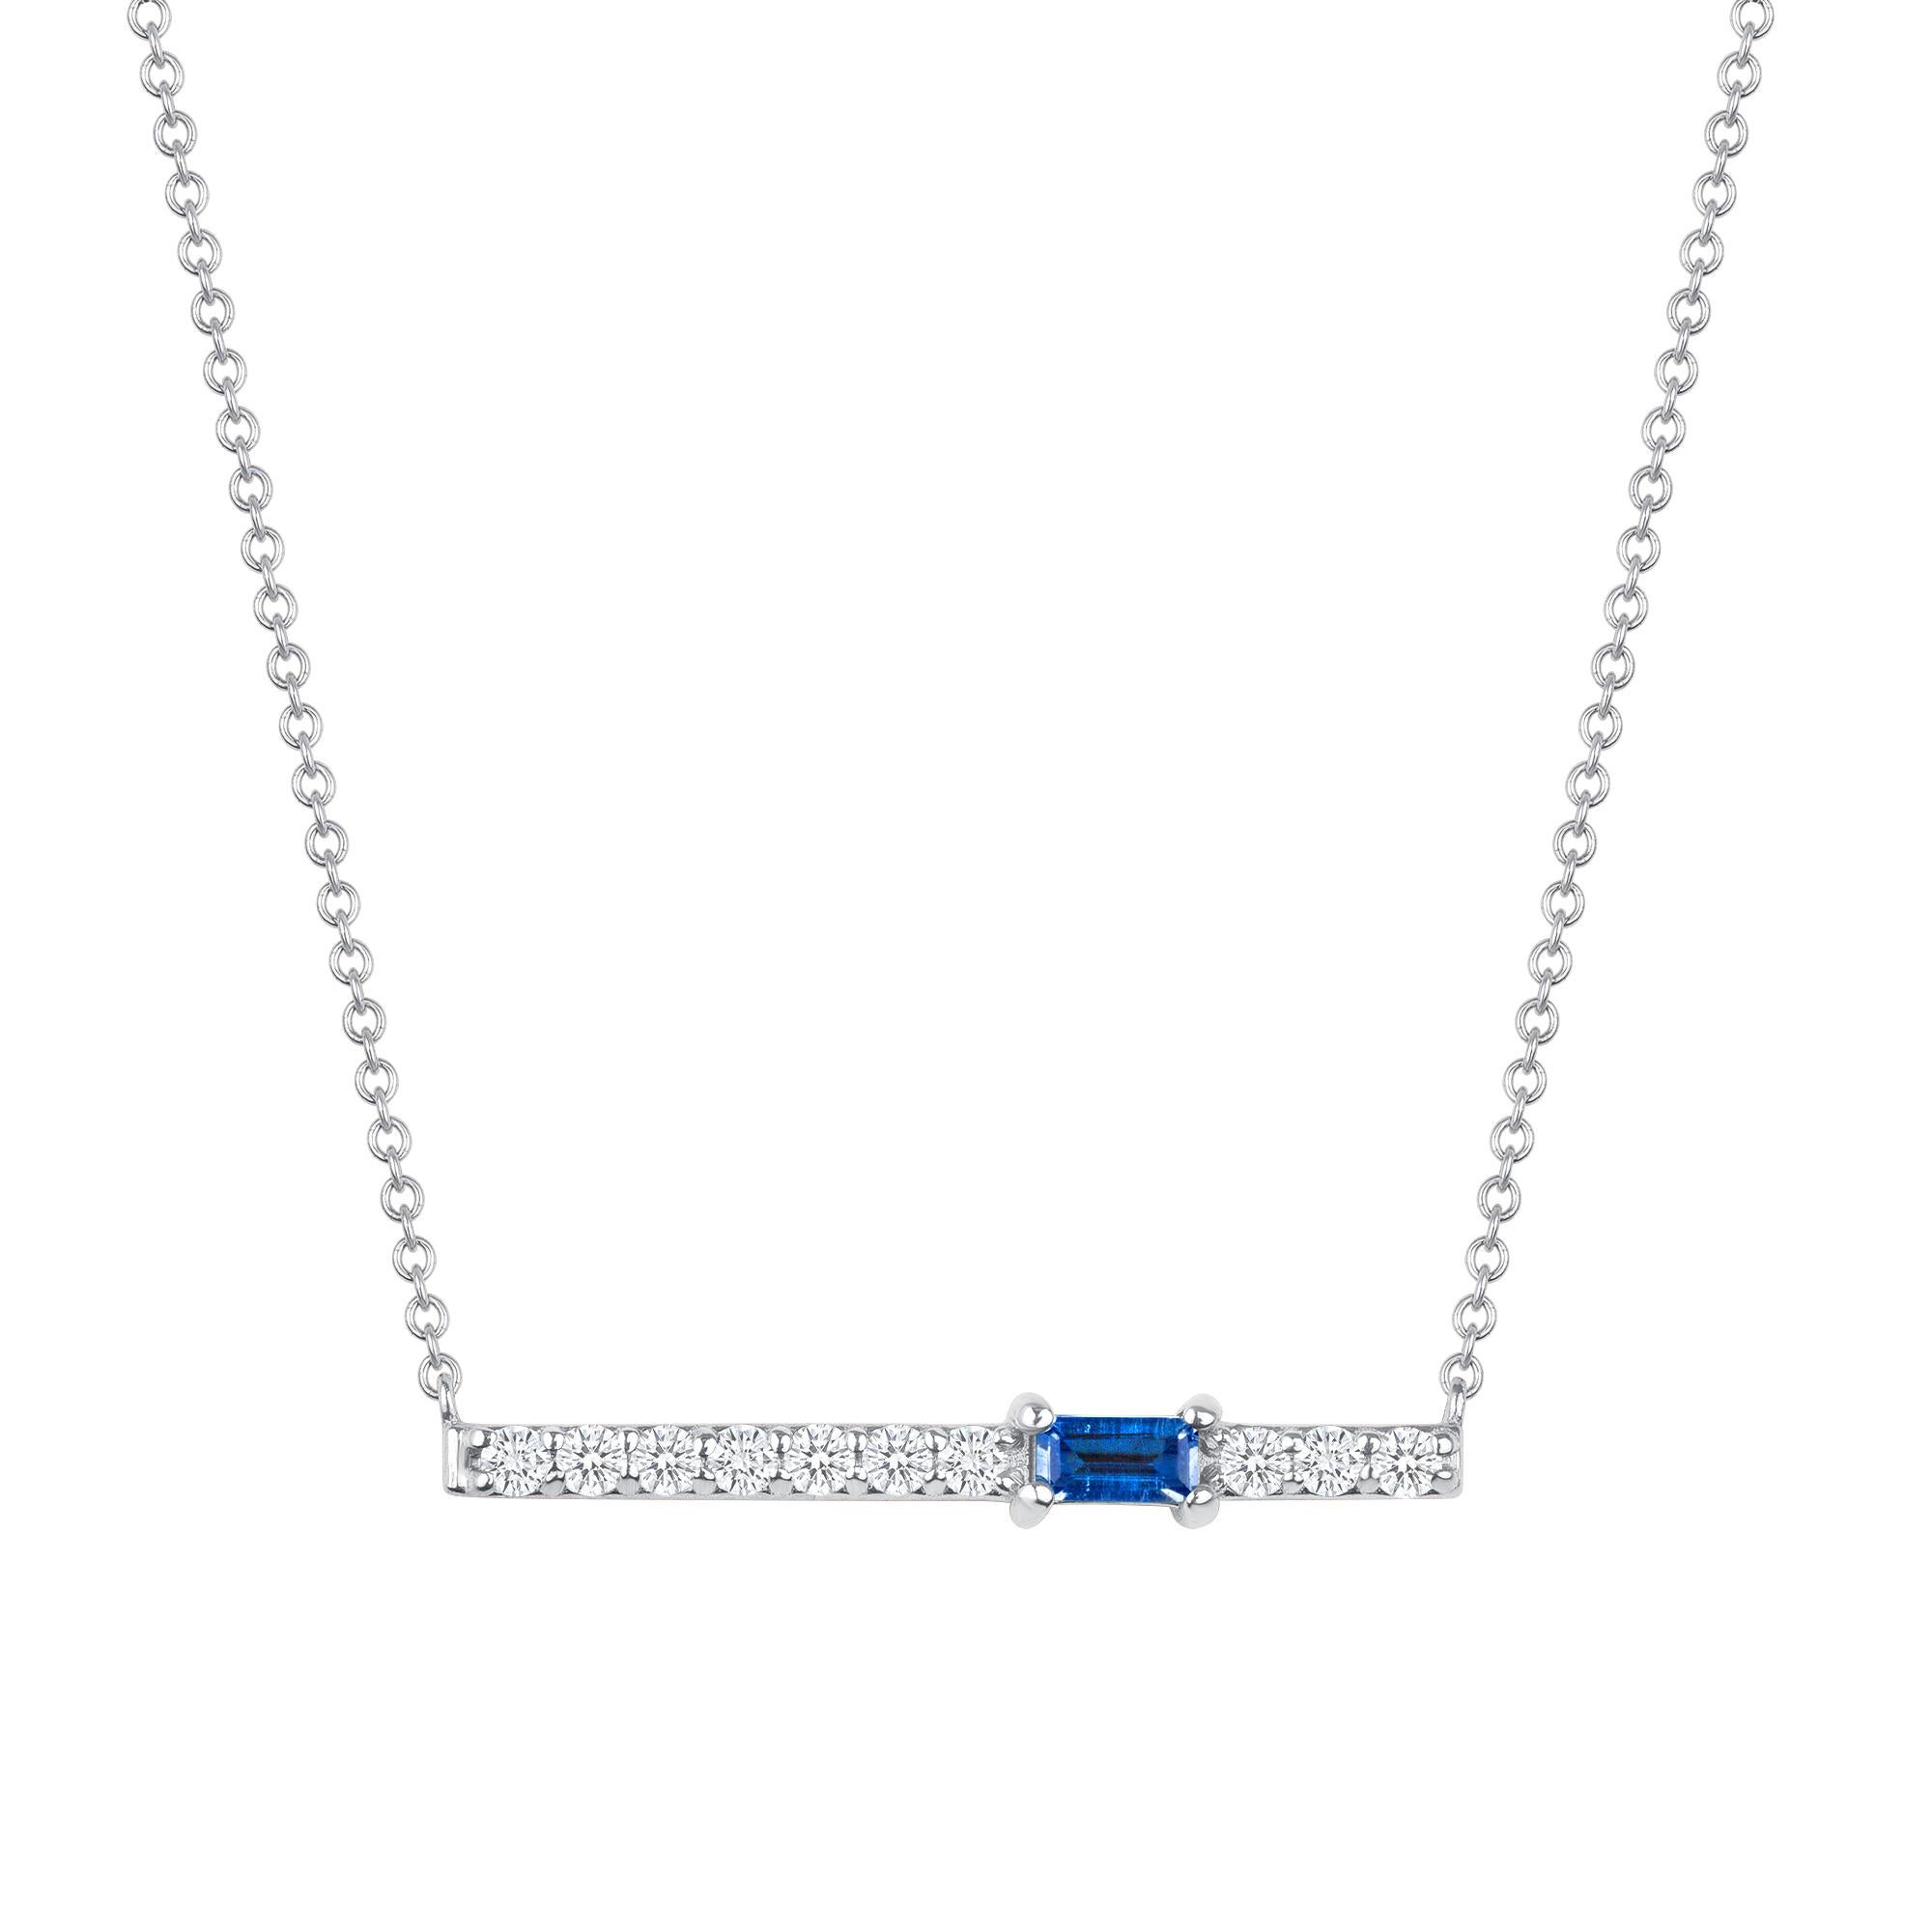 Crafted in 14K gold, round glistening diamonds enclose a baguette blue sapphire stone on this contemporary bar pendant. This stunning necklace is a modern piece that sits elegantly above the collarbone making it the perfect necklace for layering or